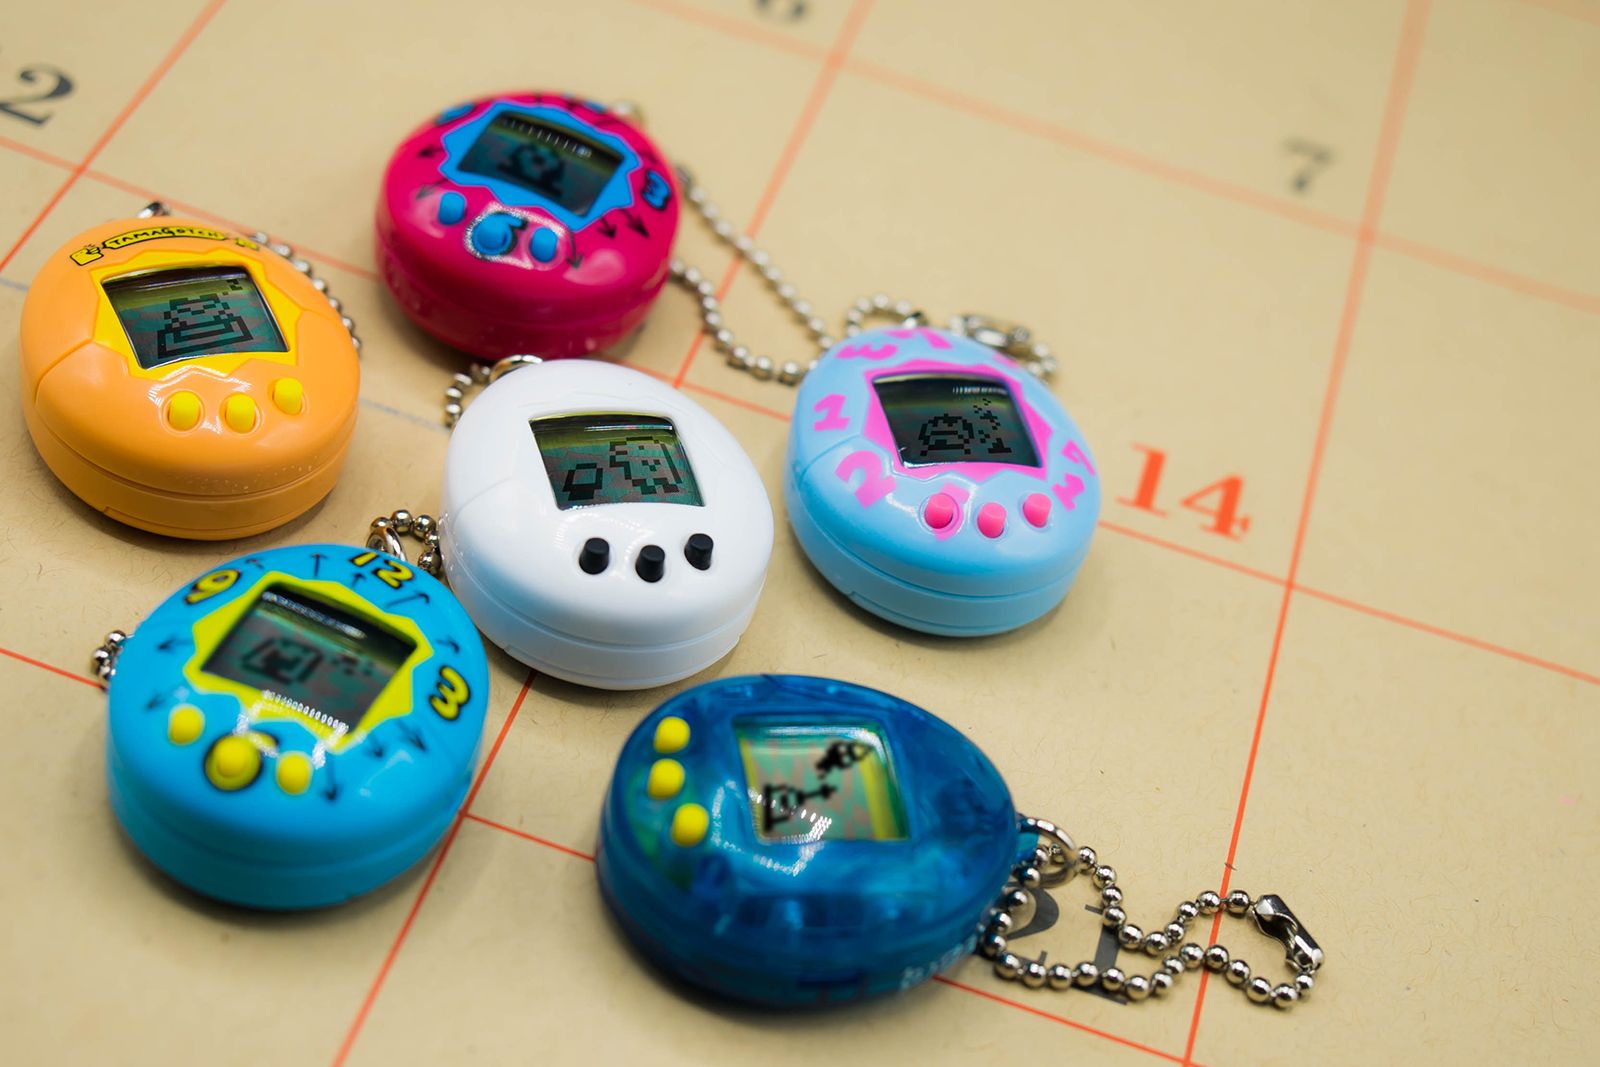 Iconic gadgets of the 90s: Amazing gadgets from yesteryear